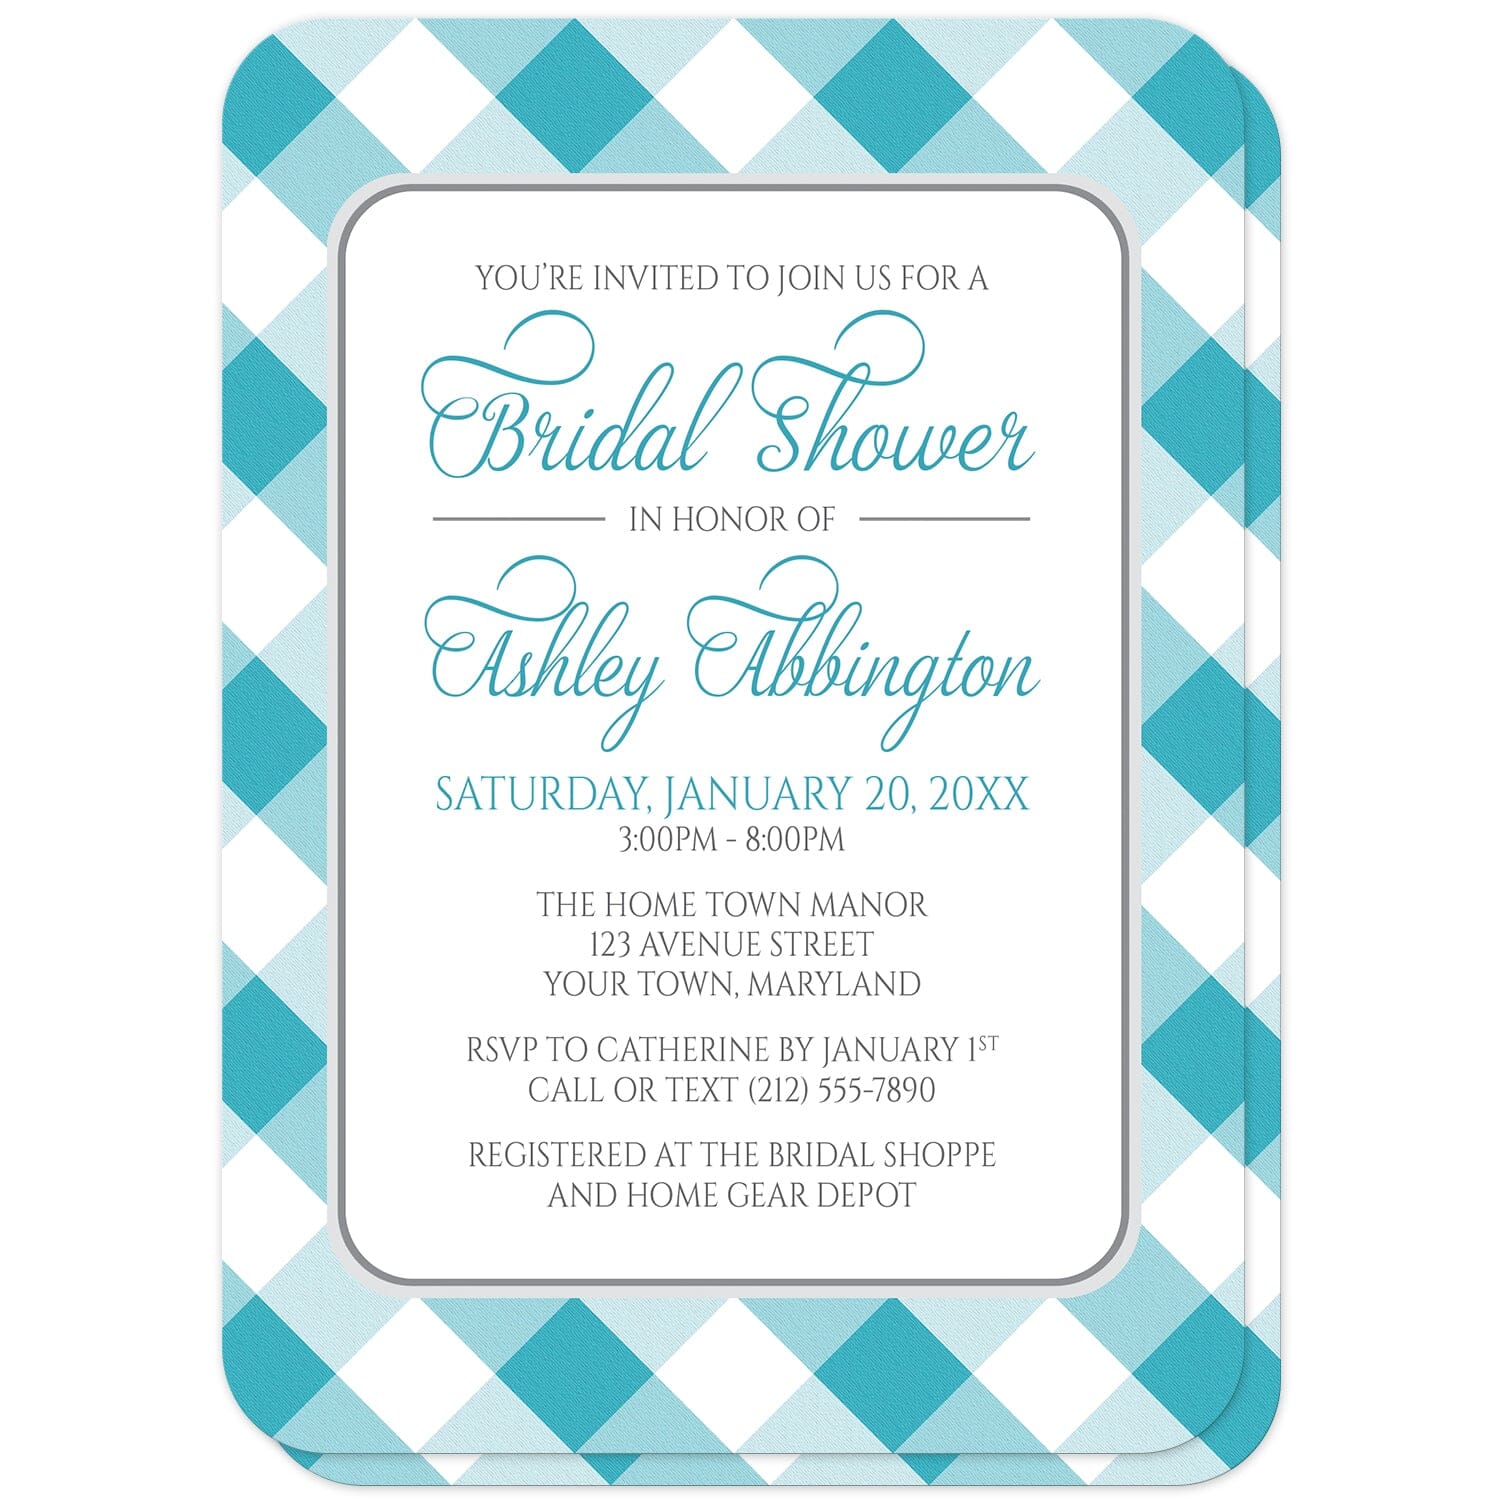 Turquoise Gingham Bridal Shower Invitations (with rounded corners) at Artistically Invited. Turquoise gingham bridal shower invitations with your personalized bridal shower celebration details custom printed in turquoise and gray inside a white rectangular area outlined in gray. The background design is a diagonal turquoise and white gingham pattern which is also printed on the back side of the invitations. 